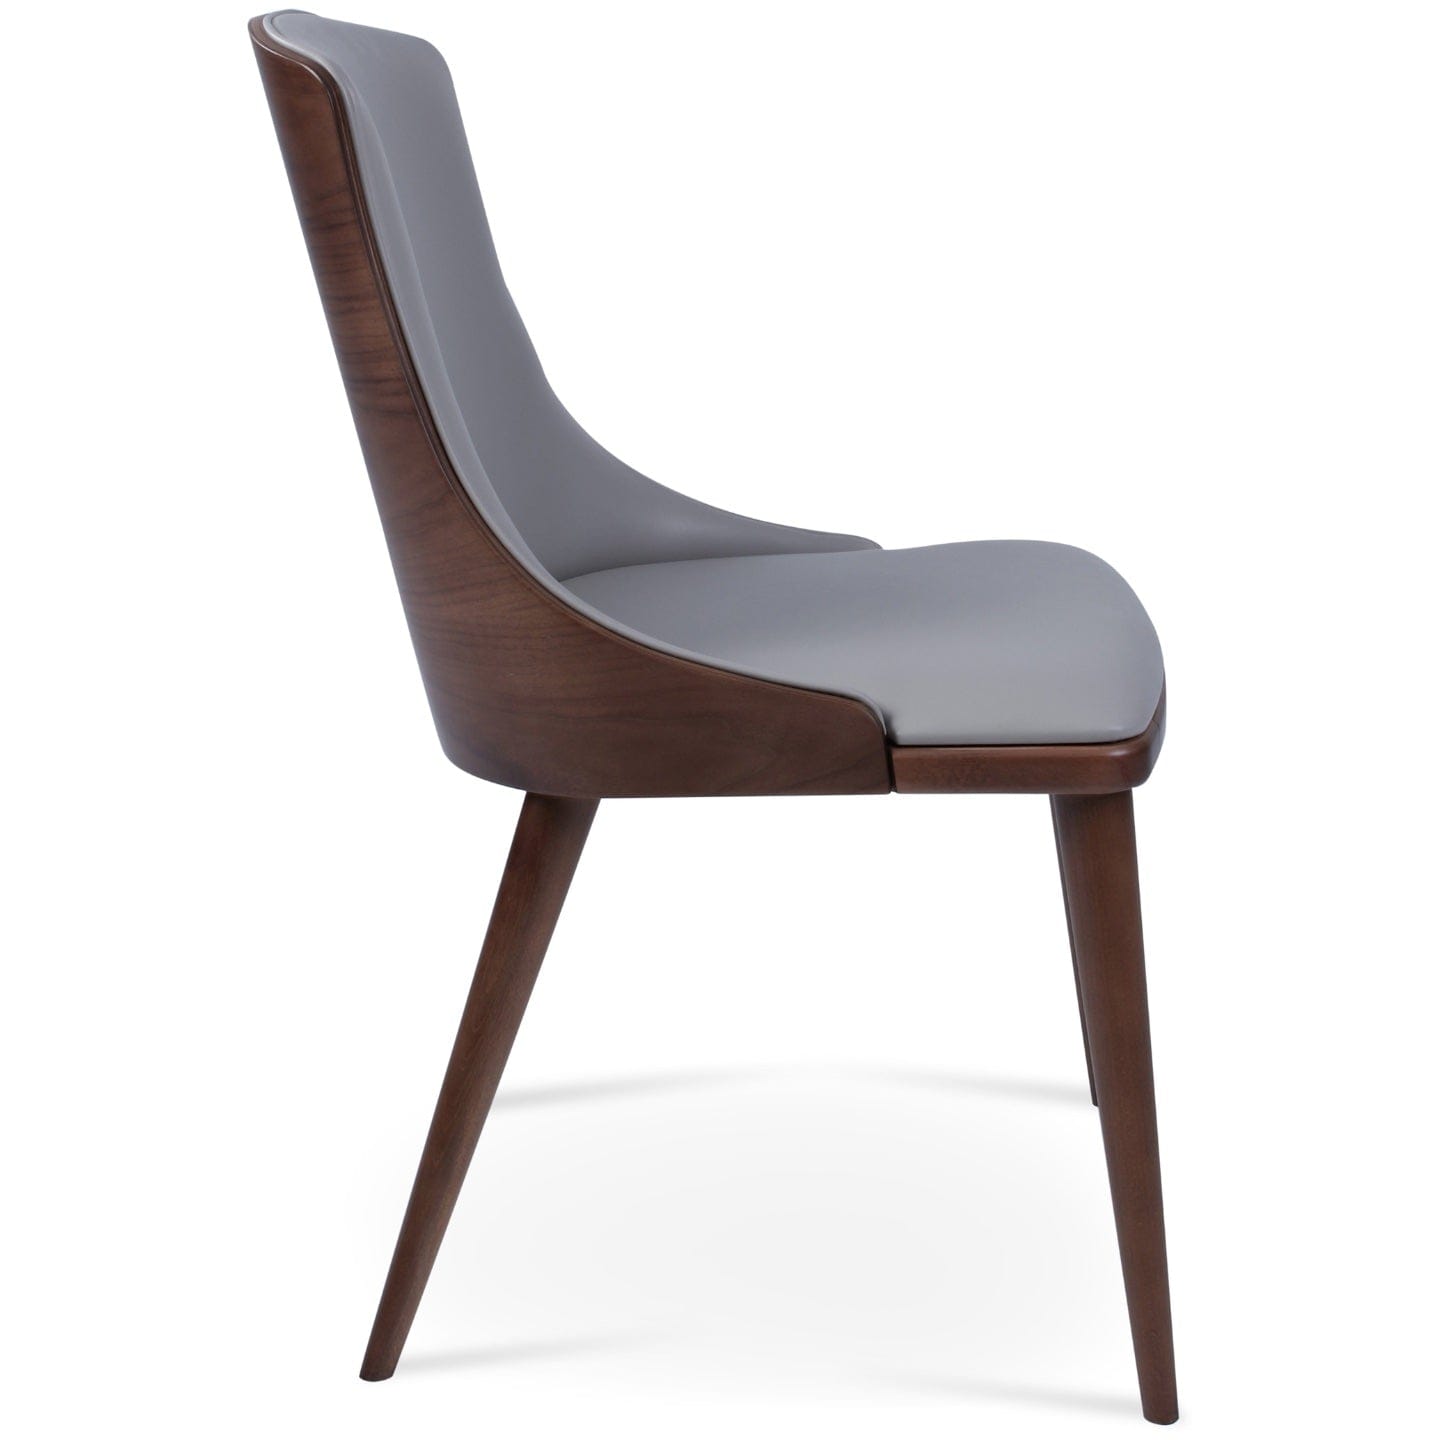 sohoConcept Kitchen & Dining Room Chairs RomanoW Wood Dining Chair | Light Grey Leather Parsons Chair